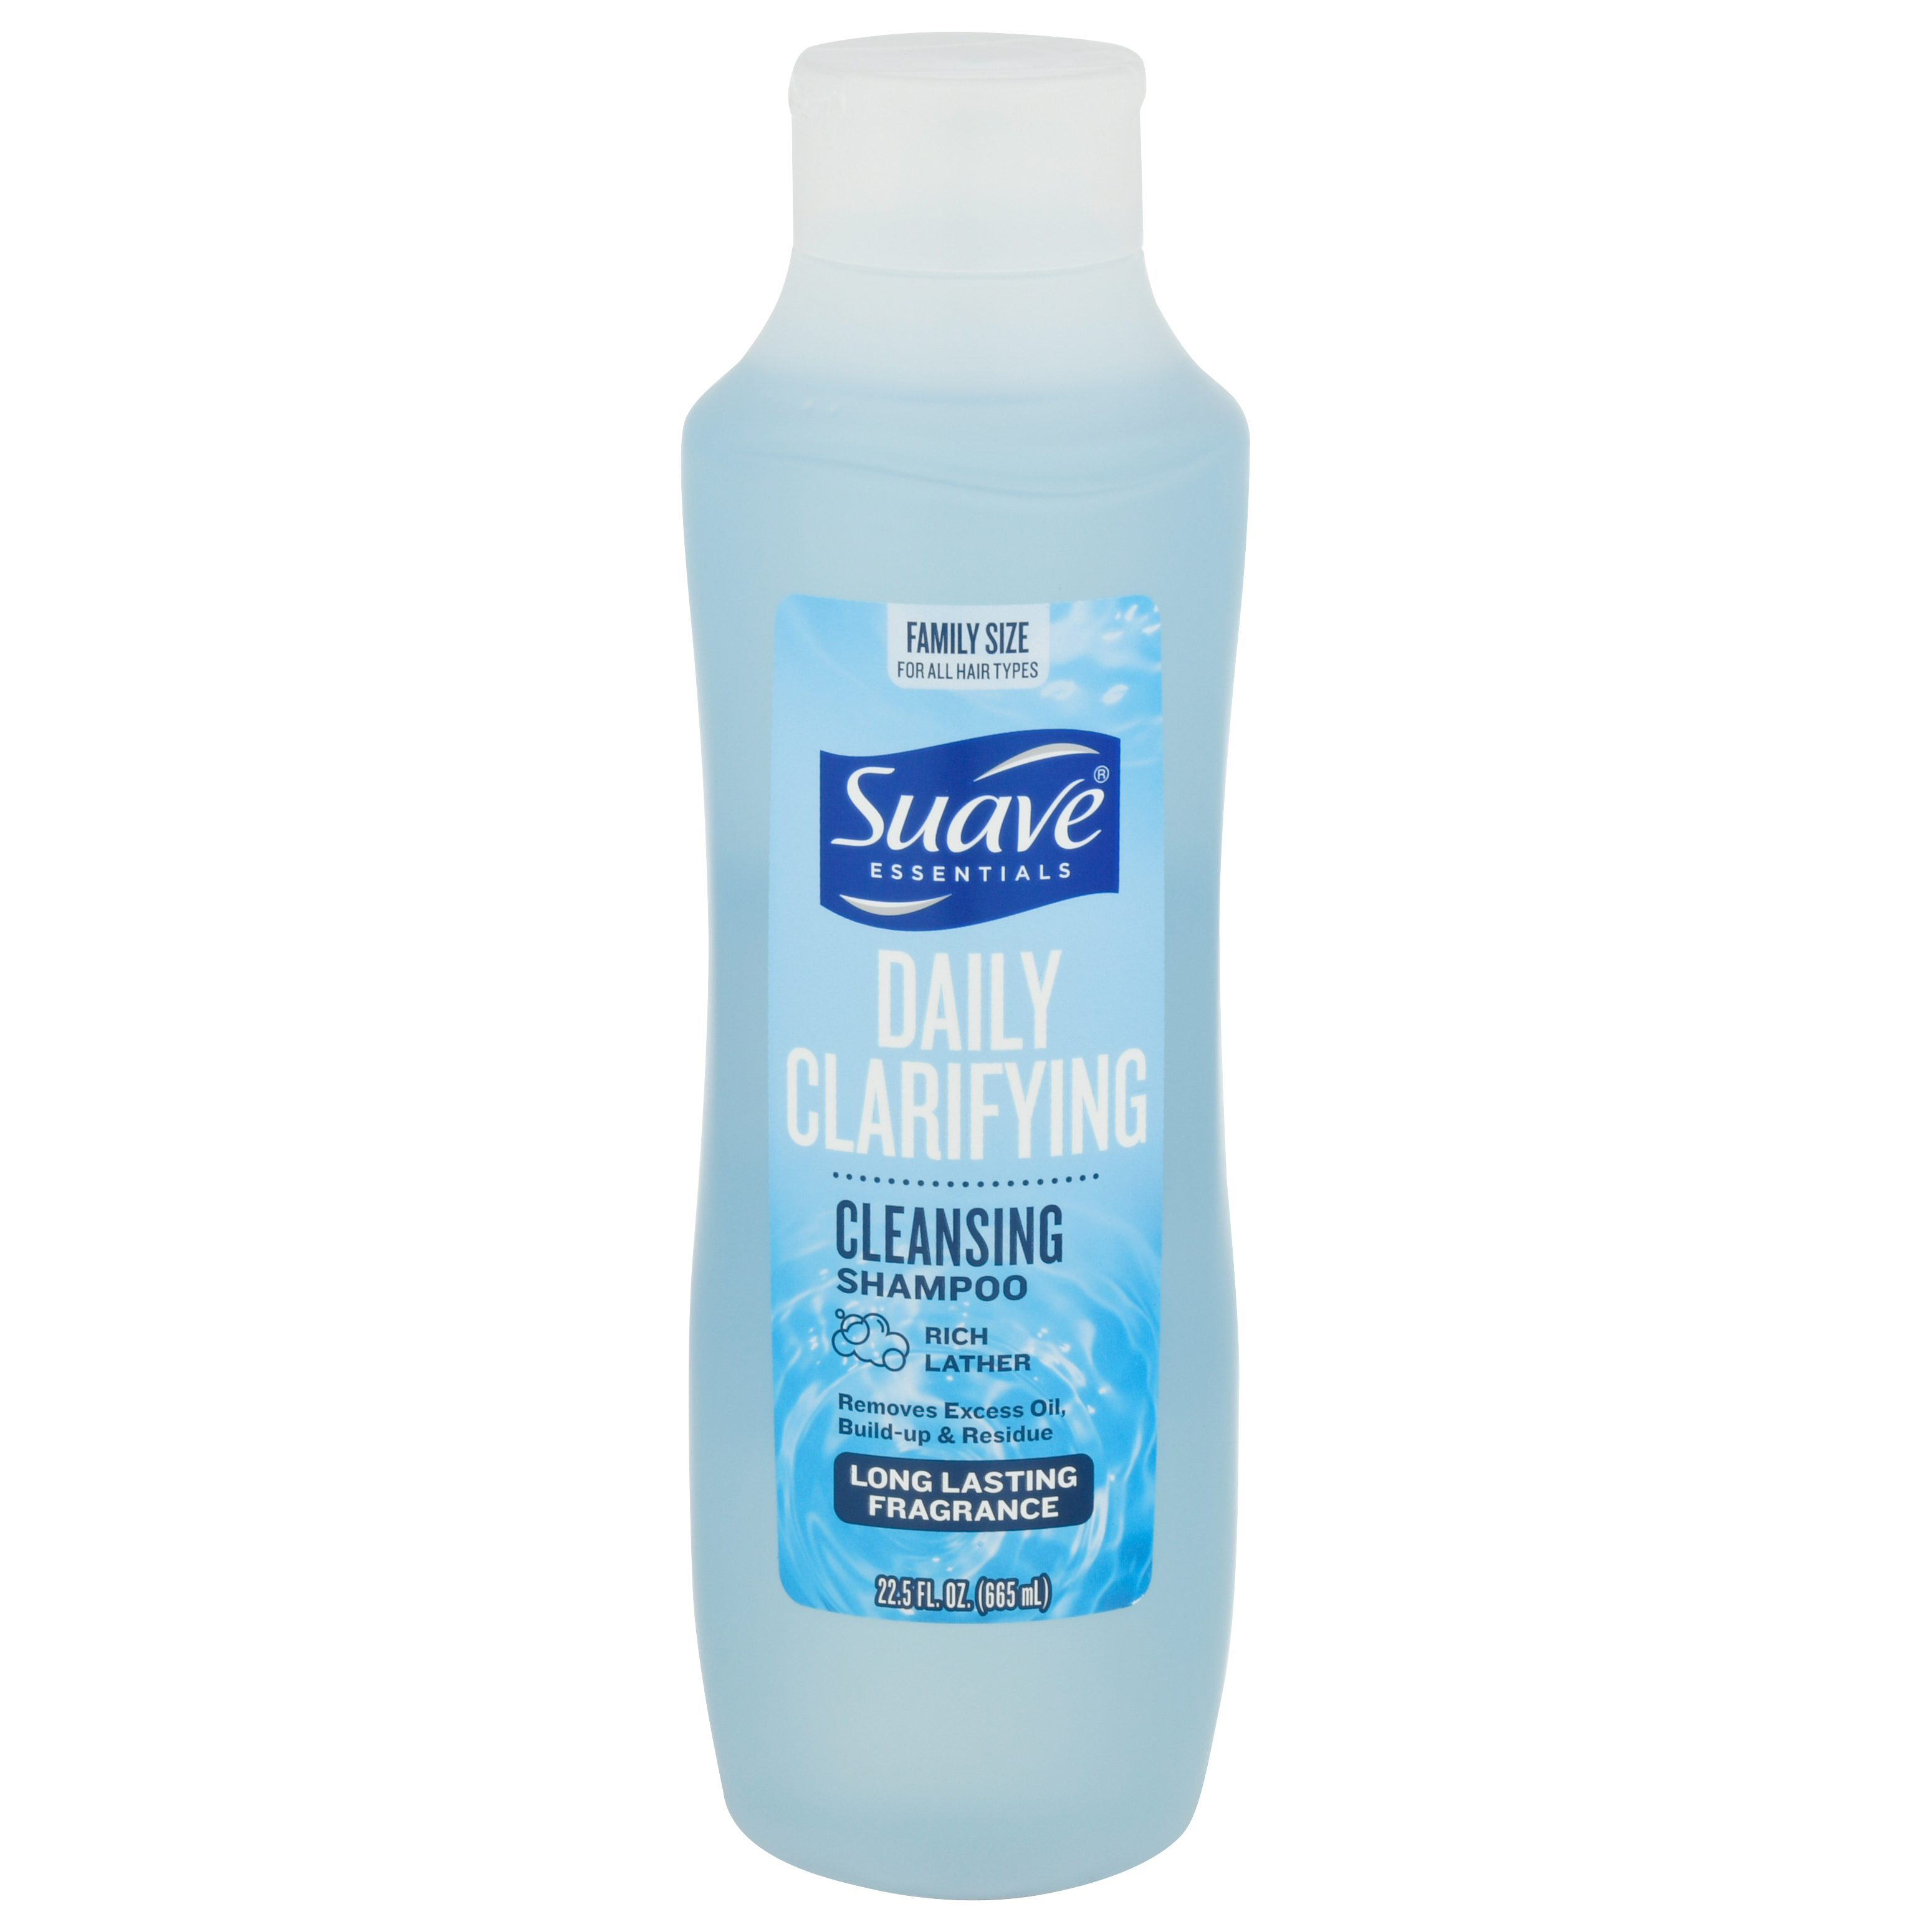 Suave Essentials Daily Clarifying Cleansing Shampoo Family Size 22.5 fl oz